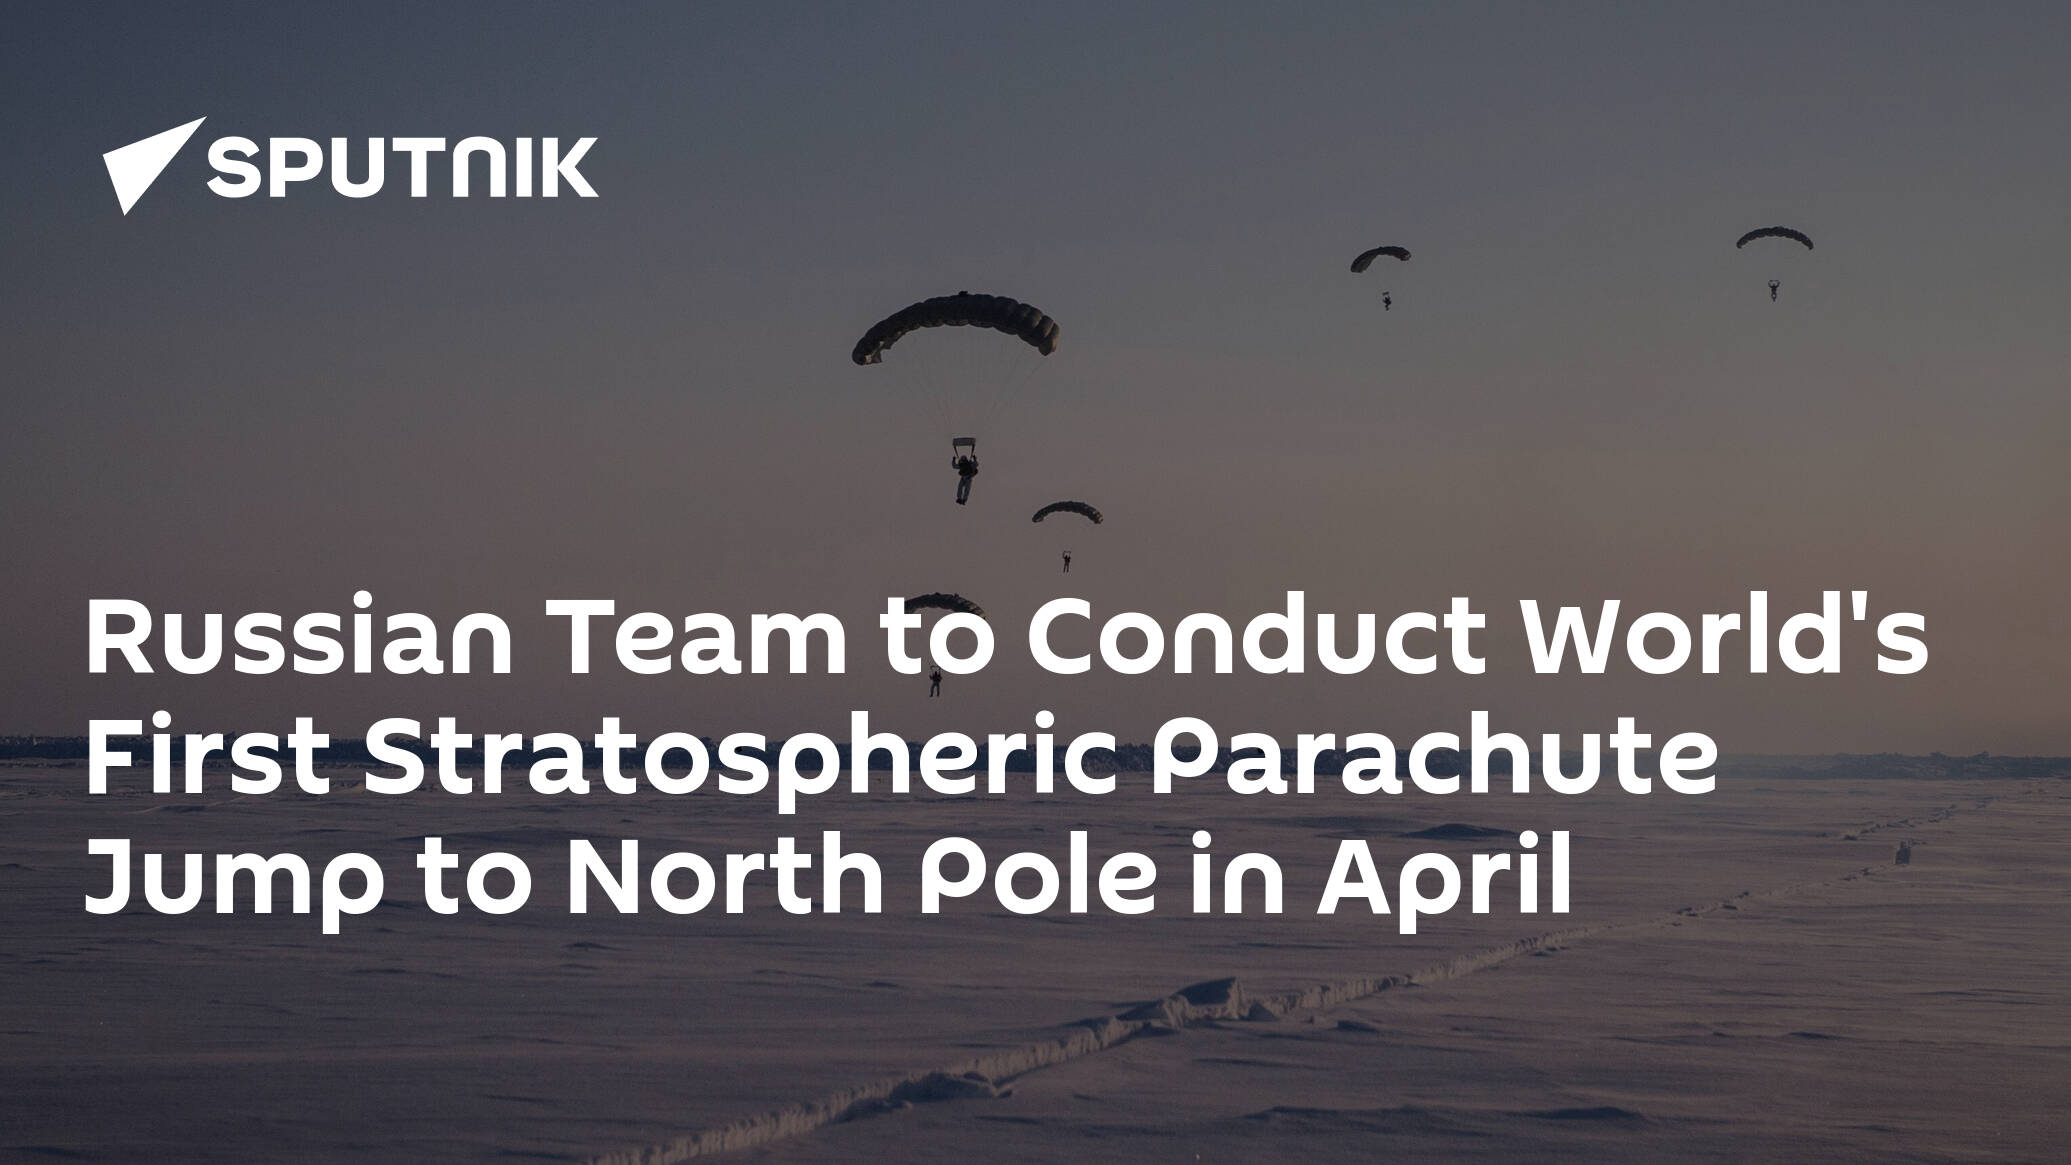 Russian Team to Conduct World's First Stratospheric Parachute Jump to North Pole in April